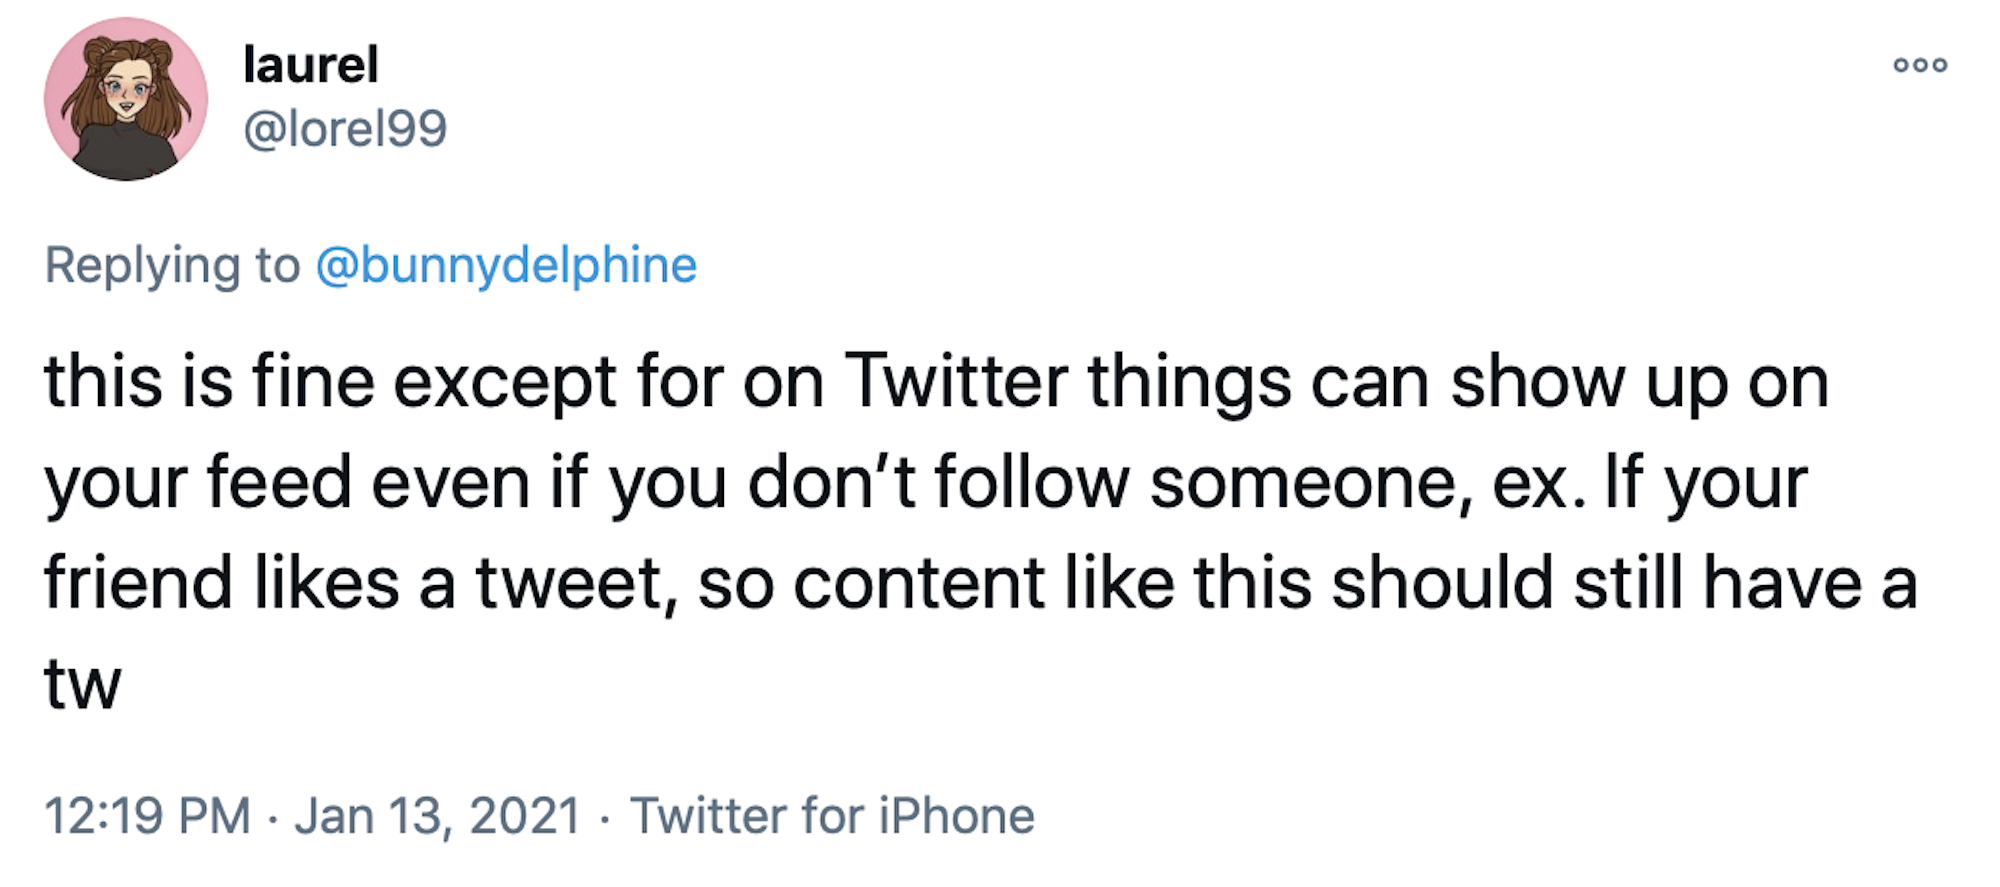 this is fine except for on Twitter things can show up on your feed even if you don’t follow someone, ex. If your friend likes a tweet, so content like this should still have a tw